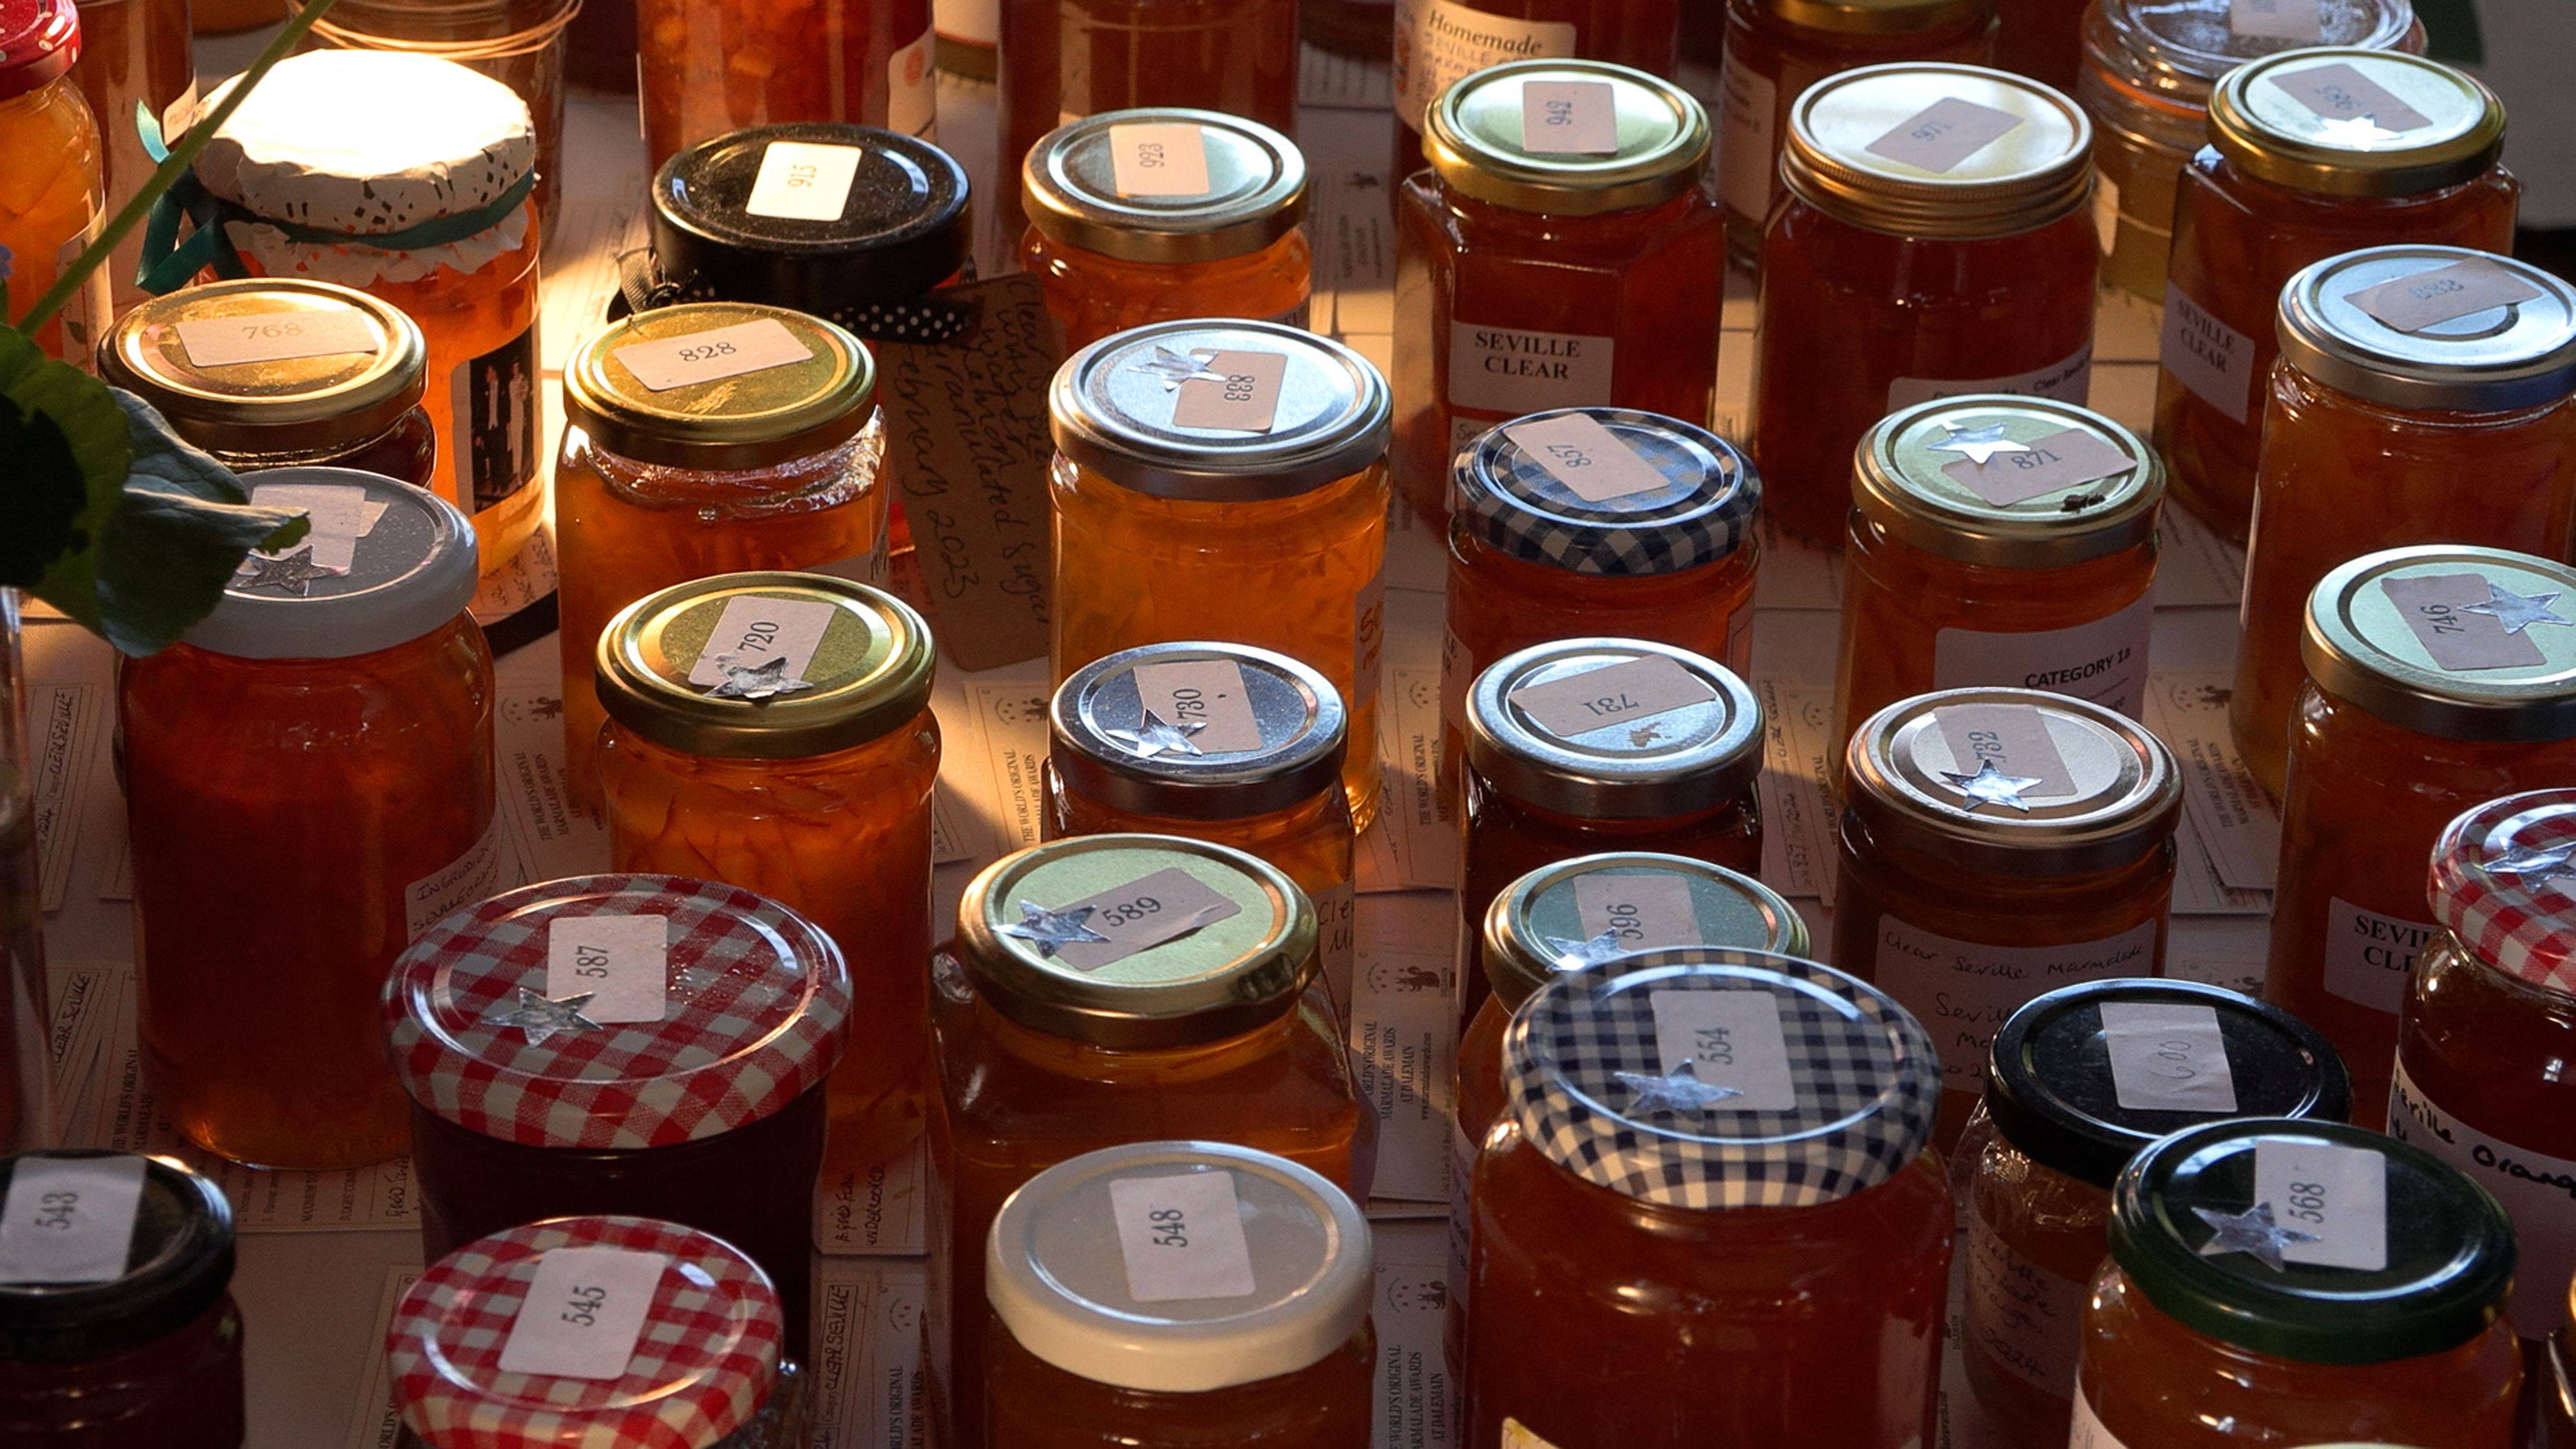 Some of the thousands of jars of marmalade at the 2024 Dalemain World Marmalade Awards, in Penrith, England. The eccentric cultural event brings together marmalade lovers from around the world while promoting the preserve loved by Queen Elizabeth. Photo: AFP